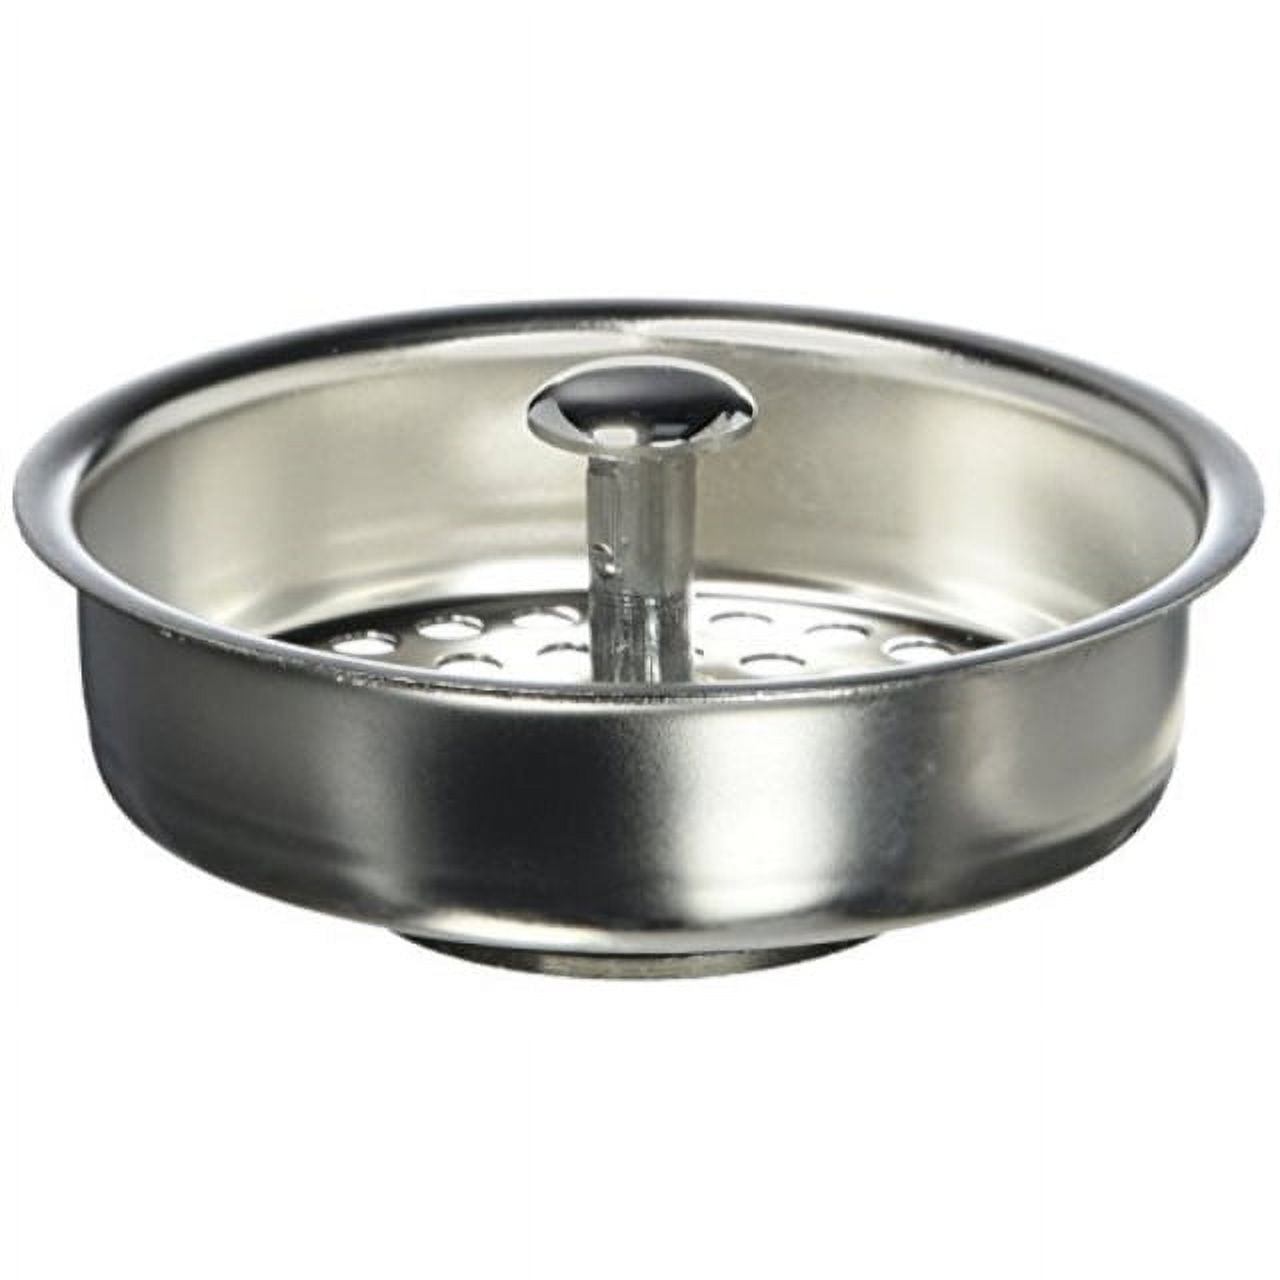 Everflow Stainless Steel Kitchen Sink Strainer Basket Universal Style Rubber Stopper, Size: 3.5, Silver